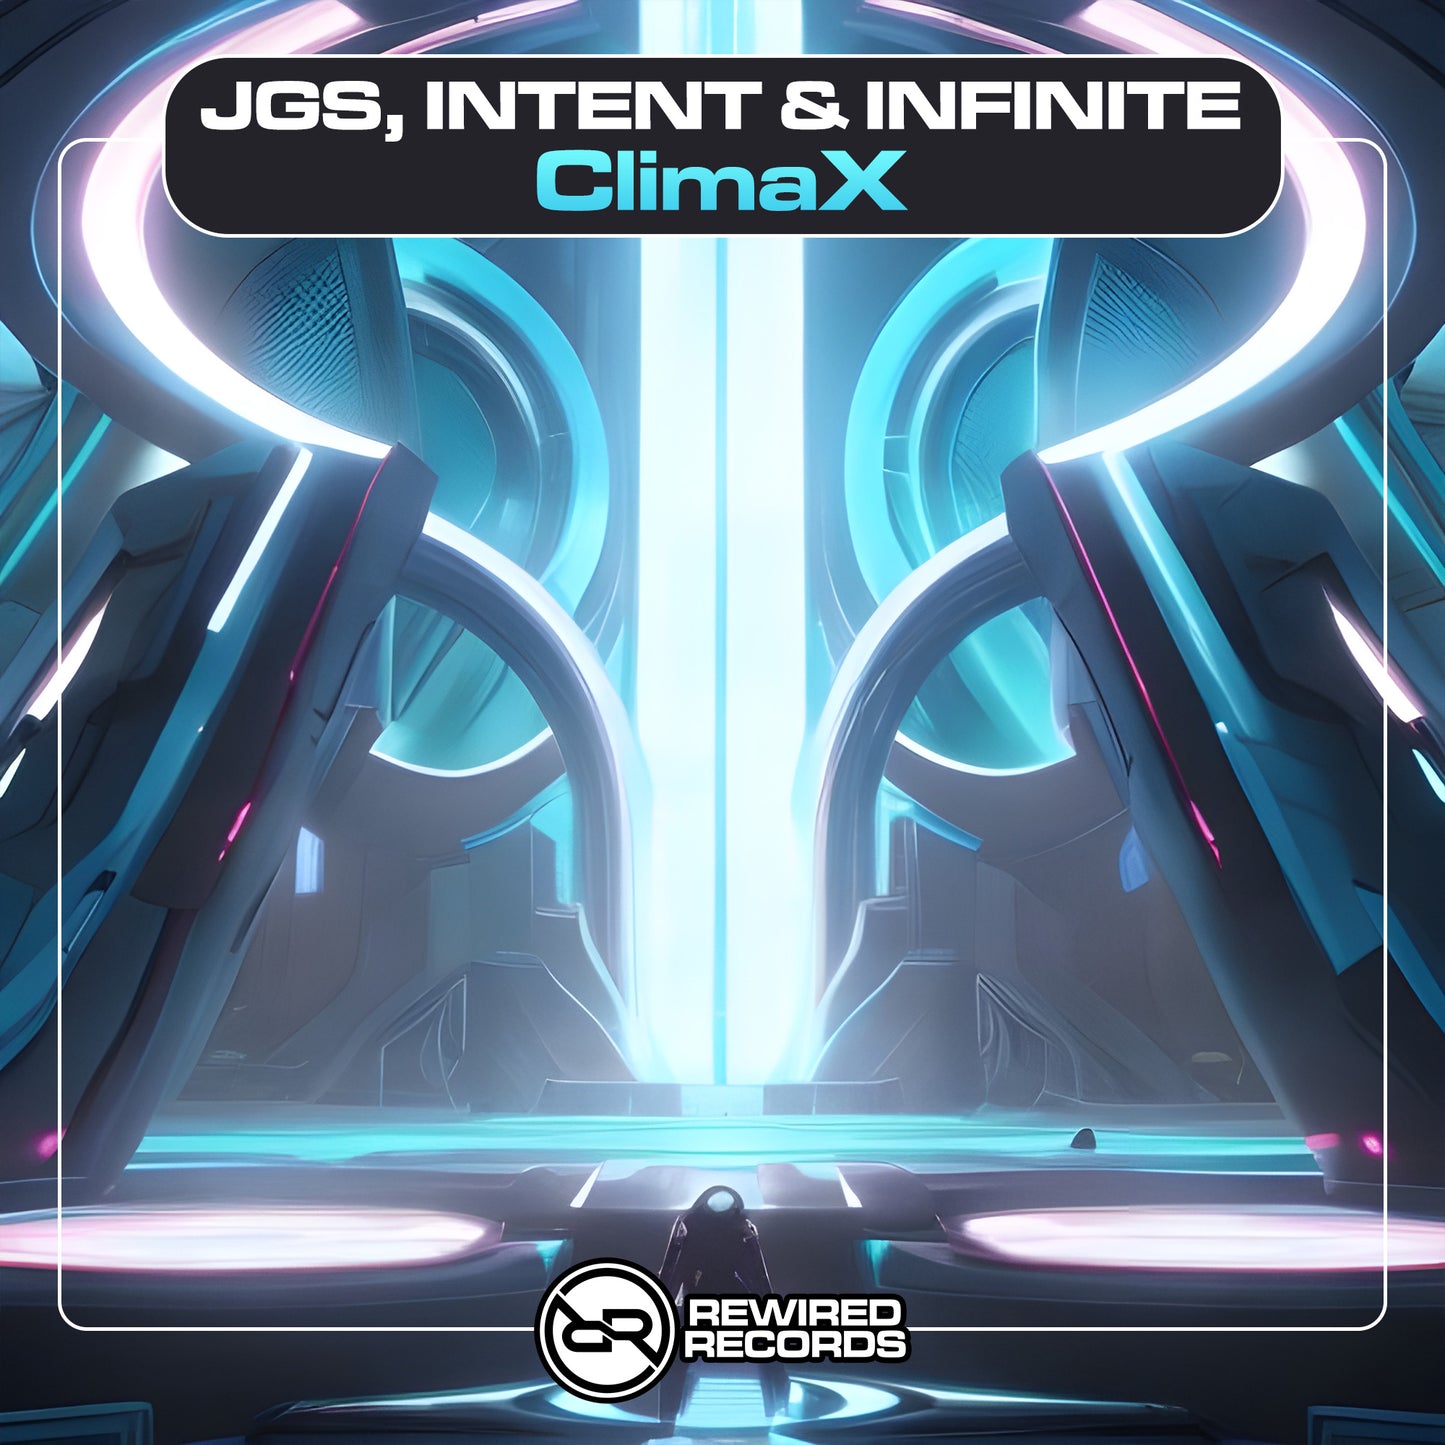 JGS, INTENT & INFINITE - The ClimaX